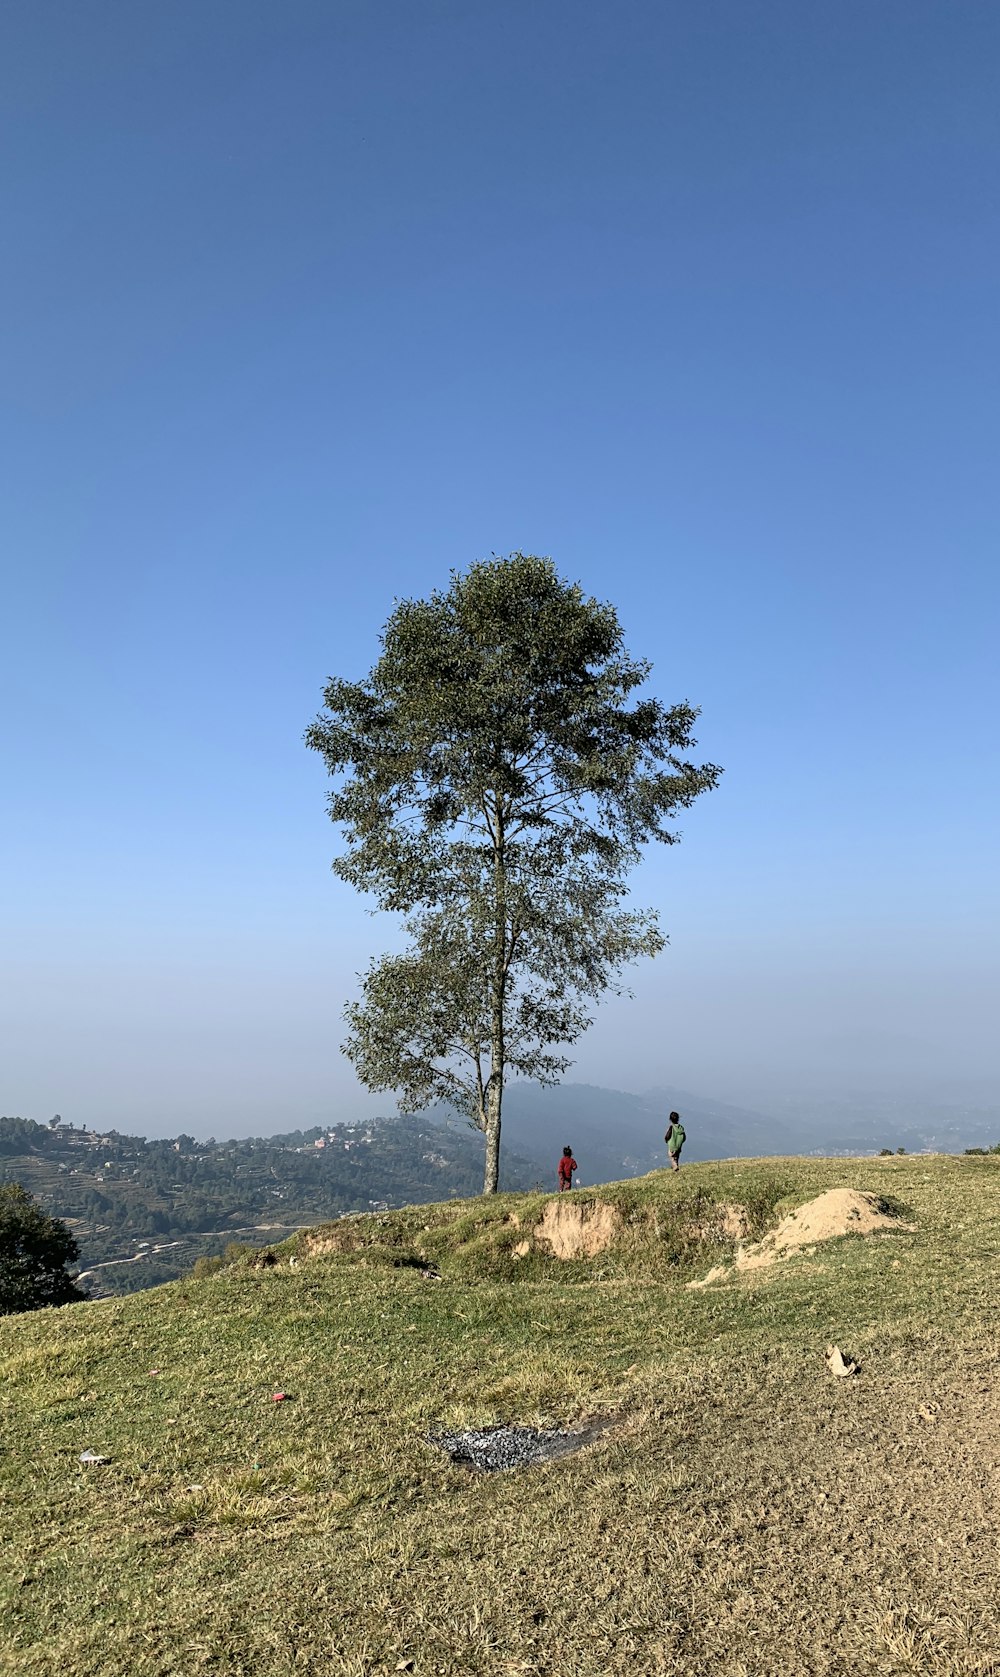 a lone tree on top of a hill